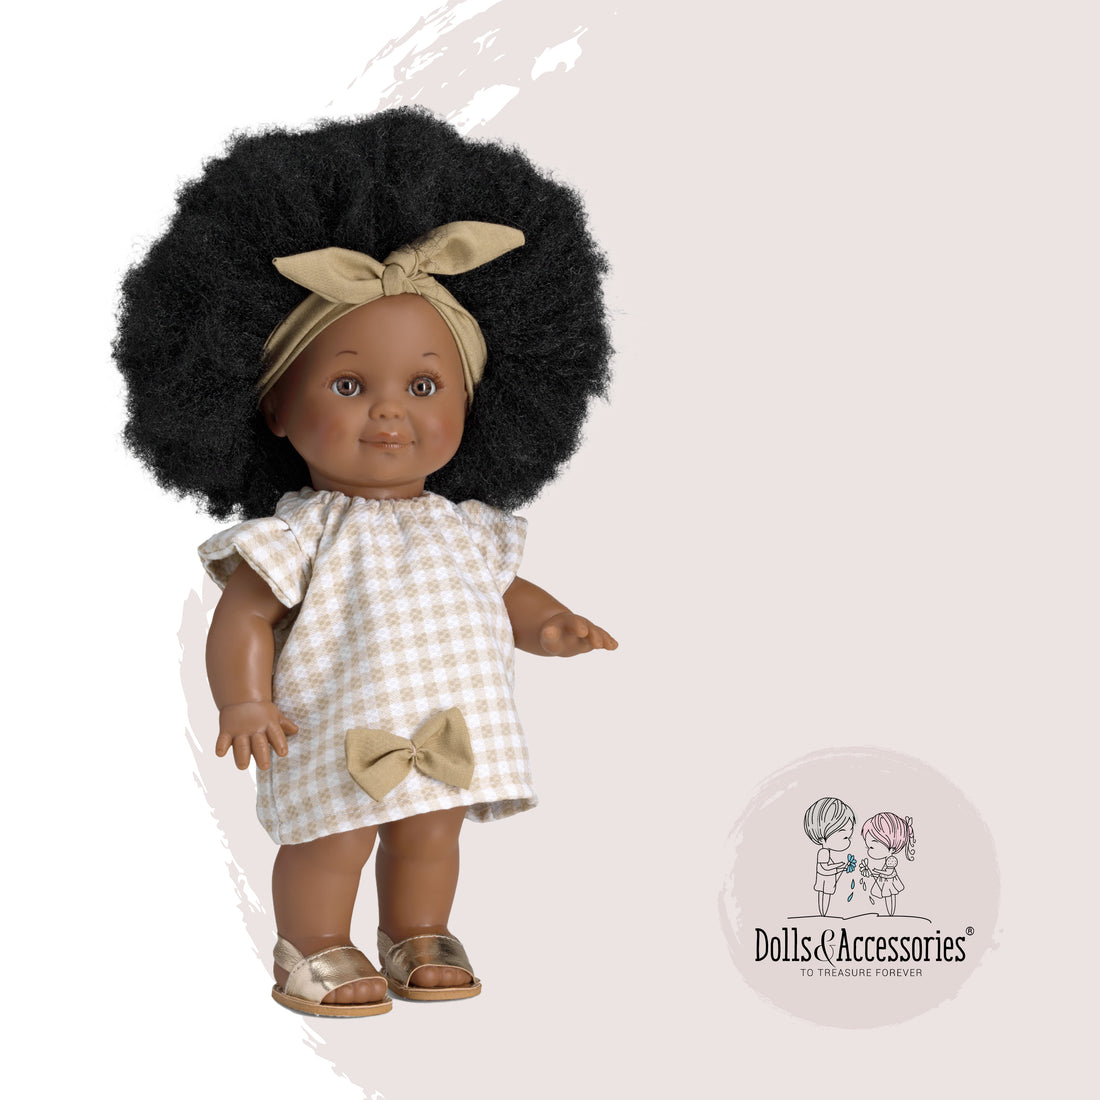 Handcrafted Betty Collection Magic Baby Doll (3165) by LAMAGIK